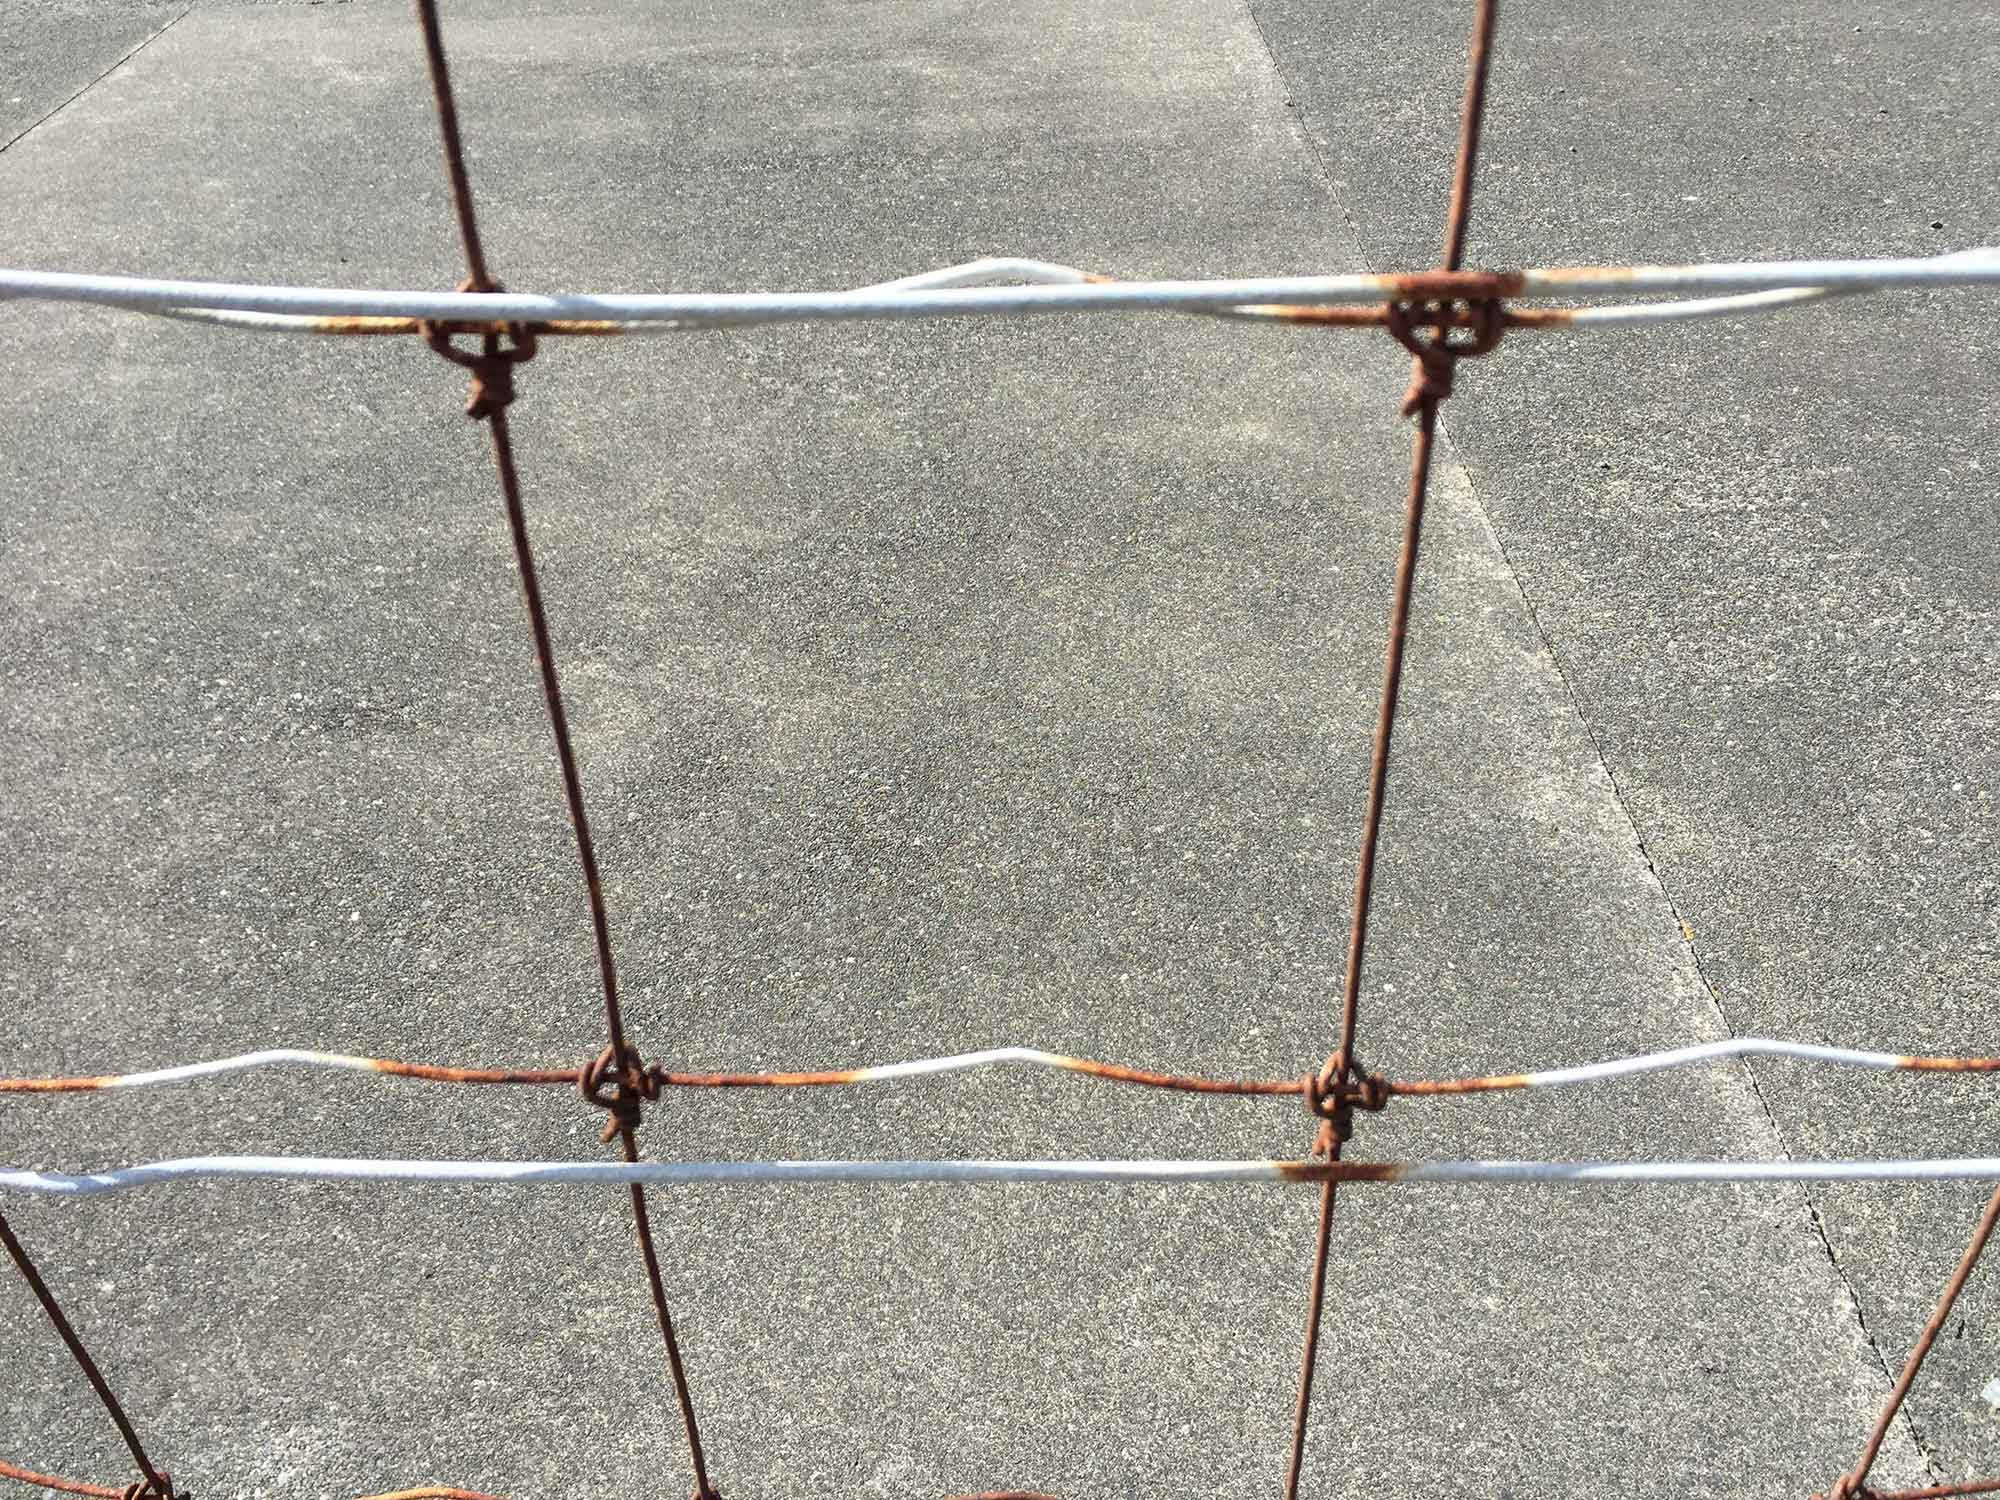 Seeing the metal fence as a woven matrix susceptible to wind and weather. A still image from performance documentation of windwoundweatherwirewovenwoman (2017). Julieanna Preston photographer.